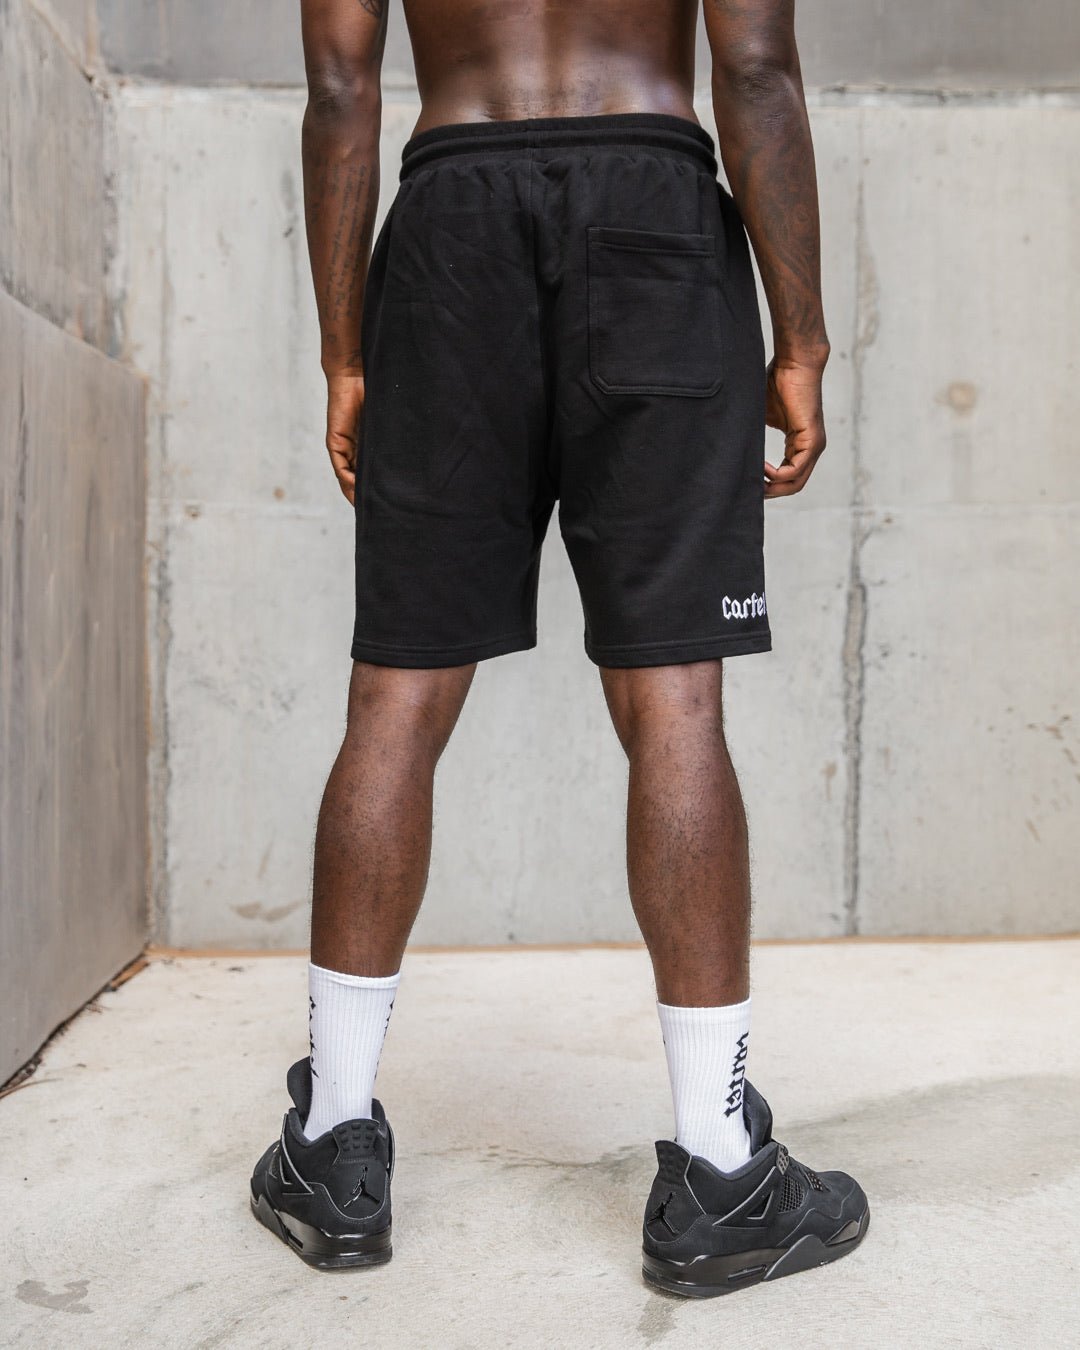 The Originals Relaxed Shorts - Black/White